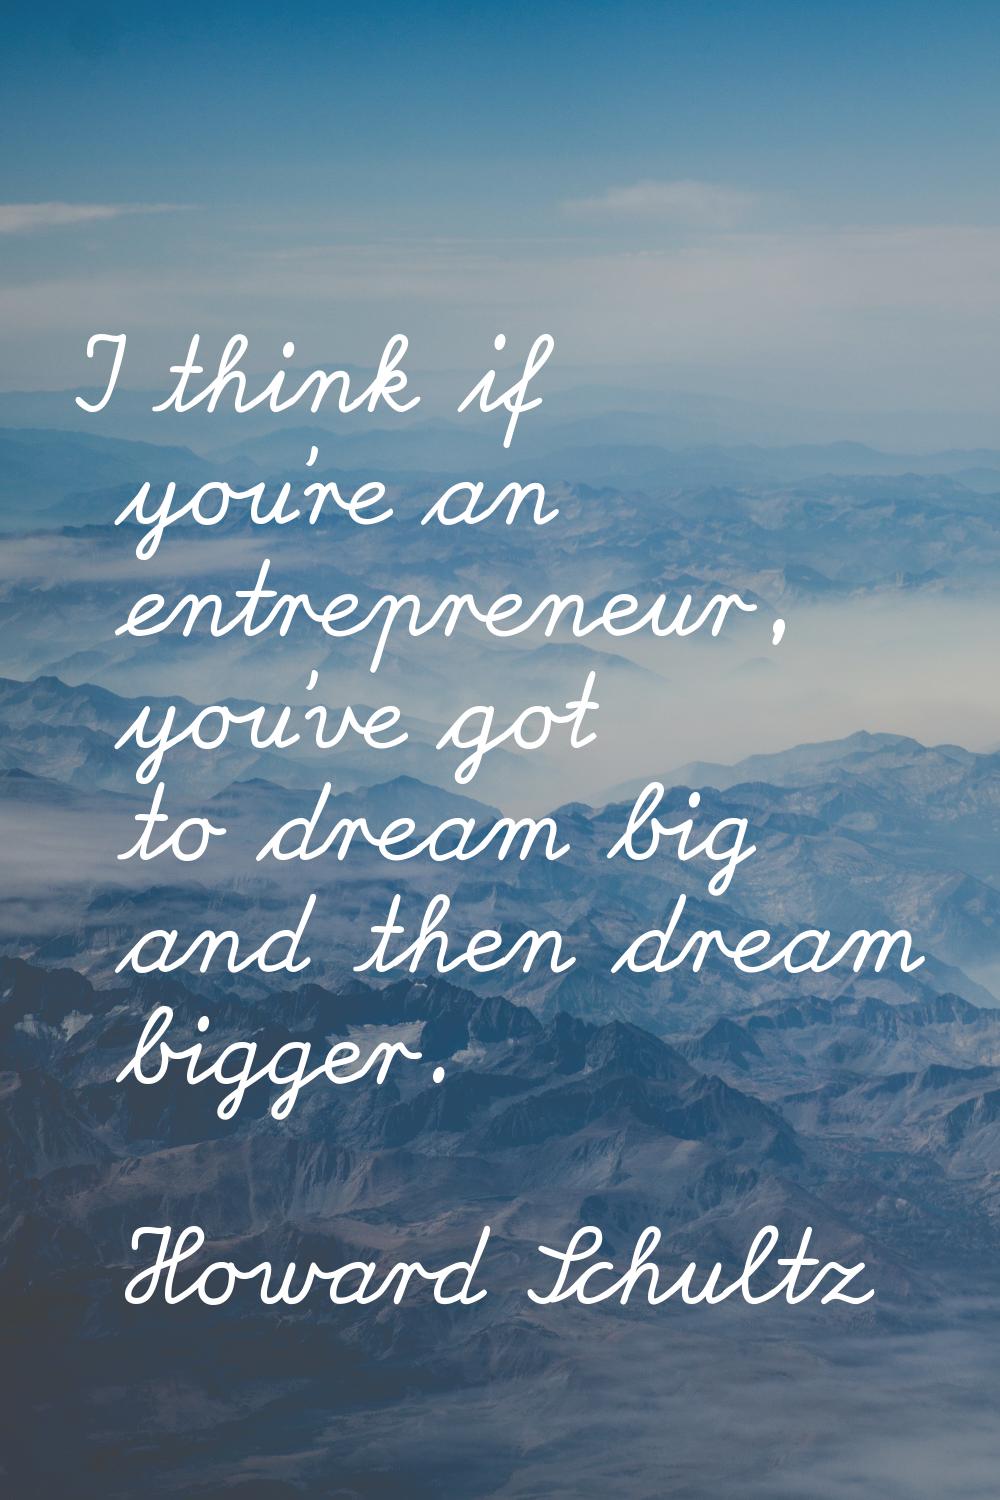 I think if you're an entrepreneur, you've got to dream big and then dream bigger.